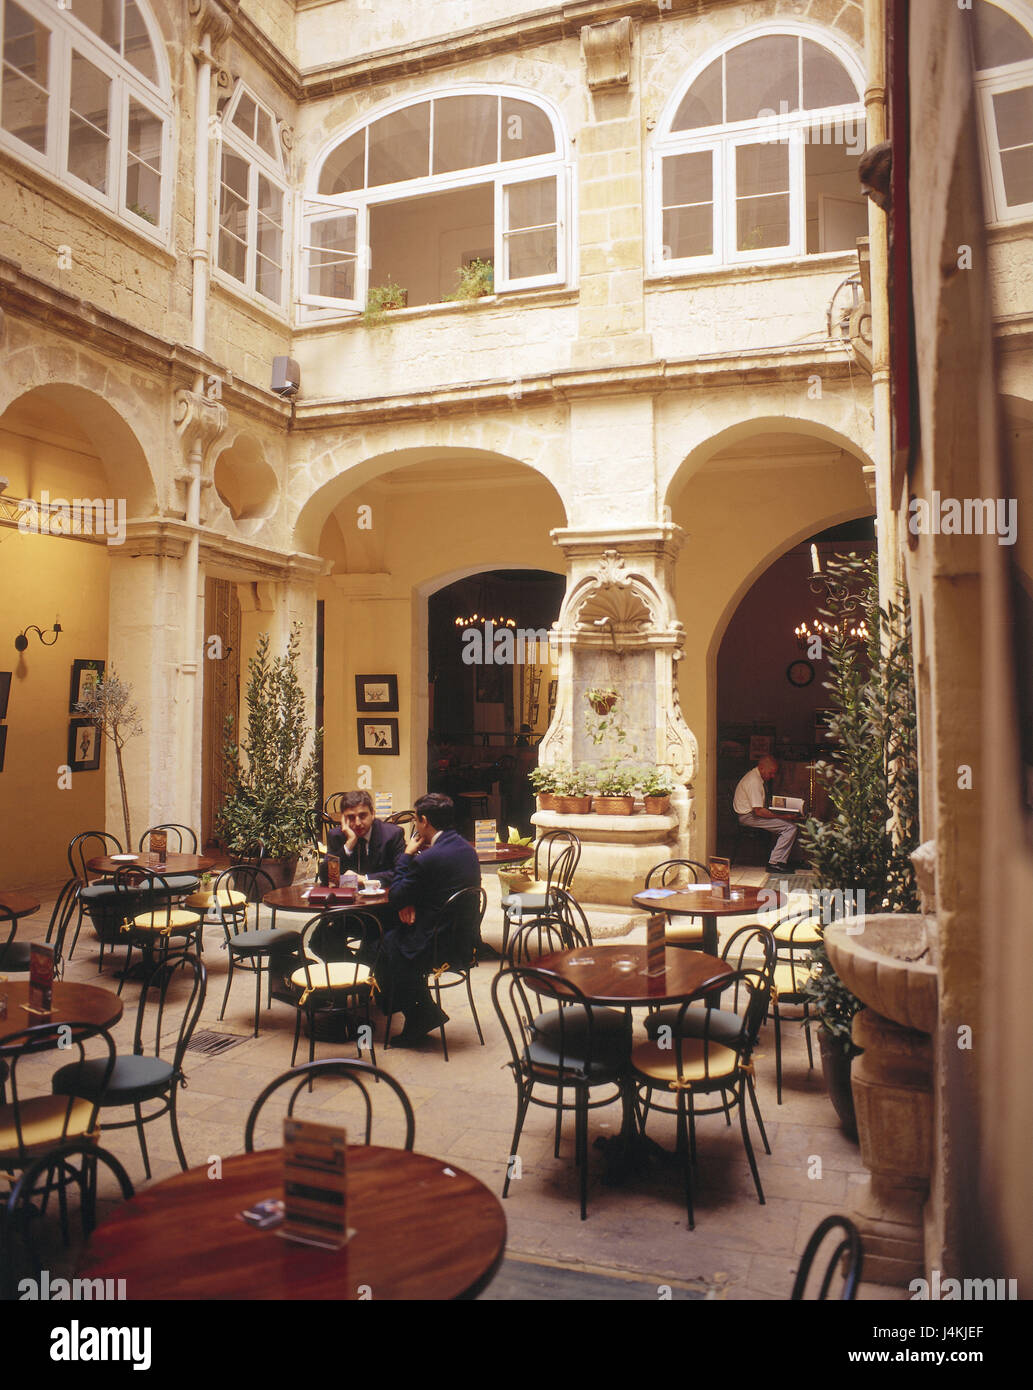 Island Malta, La Valetta, Manoel Theatre, atrium, cafe, guests, no model release! Island state, Mediterranean island, town, capital, il-Belt Valletta, Old Town, UNESCO-world cultural heritage, building, the oldest theatre of Europe, builds in 1732, inner courtyard, seating, visitor Stock Photo